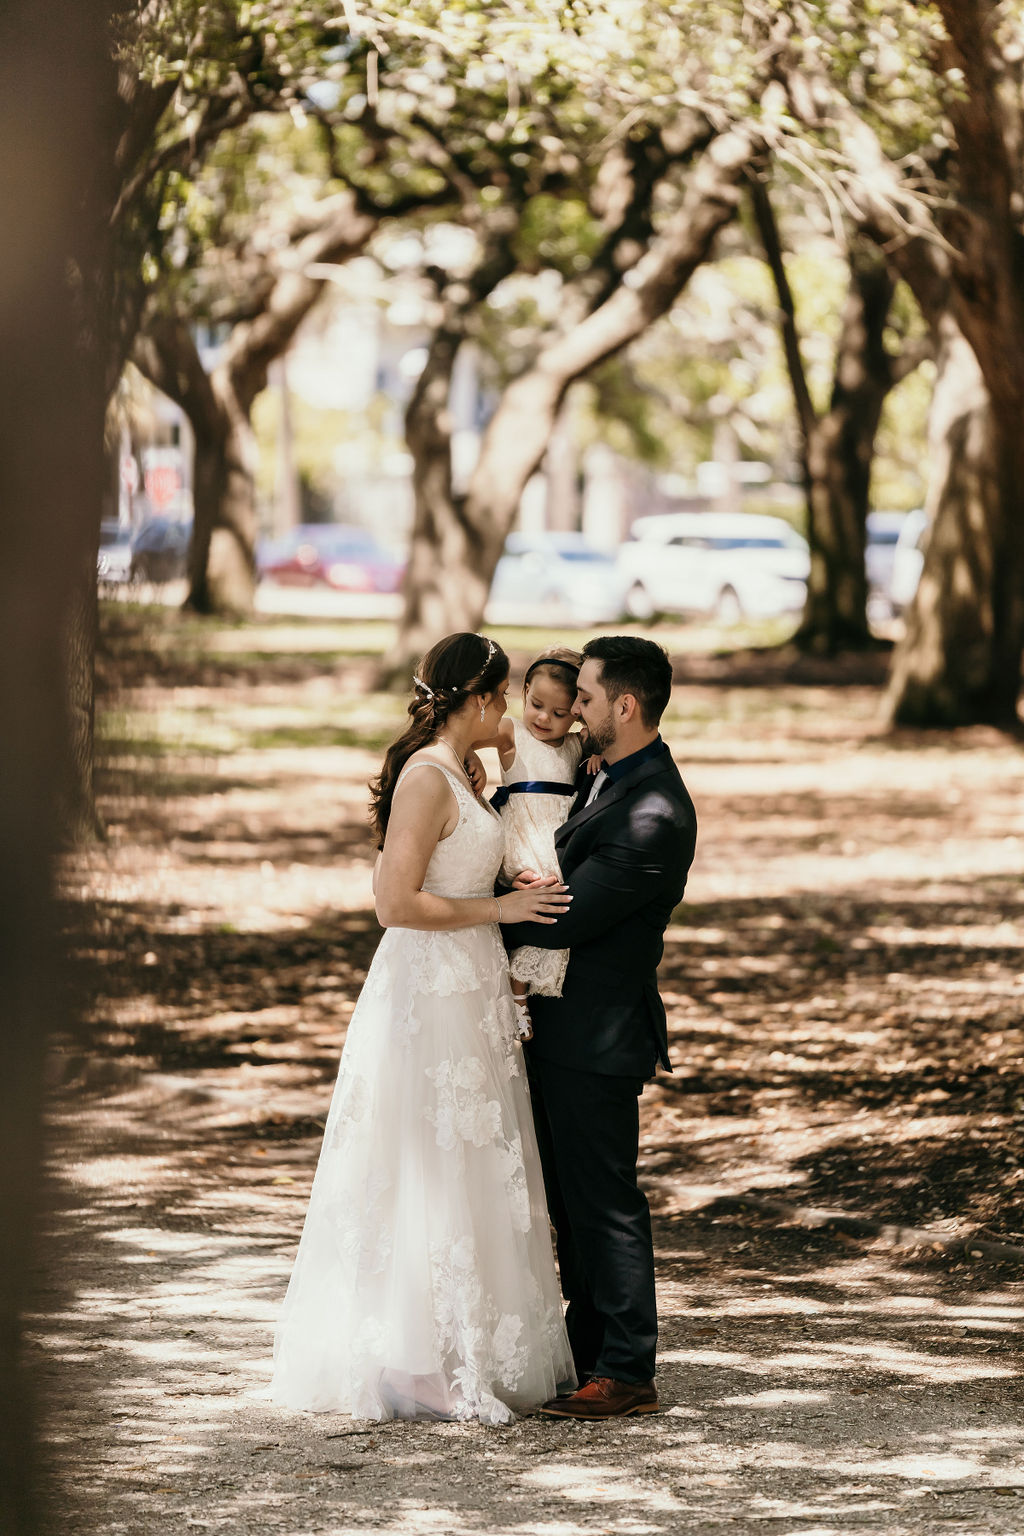 couple at their wedding ceremony located at white point garden in charleston, sc.